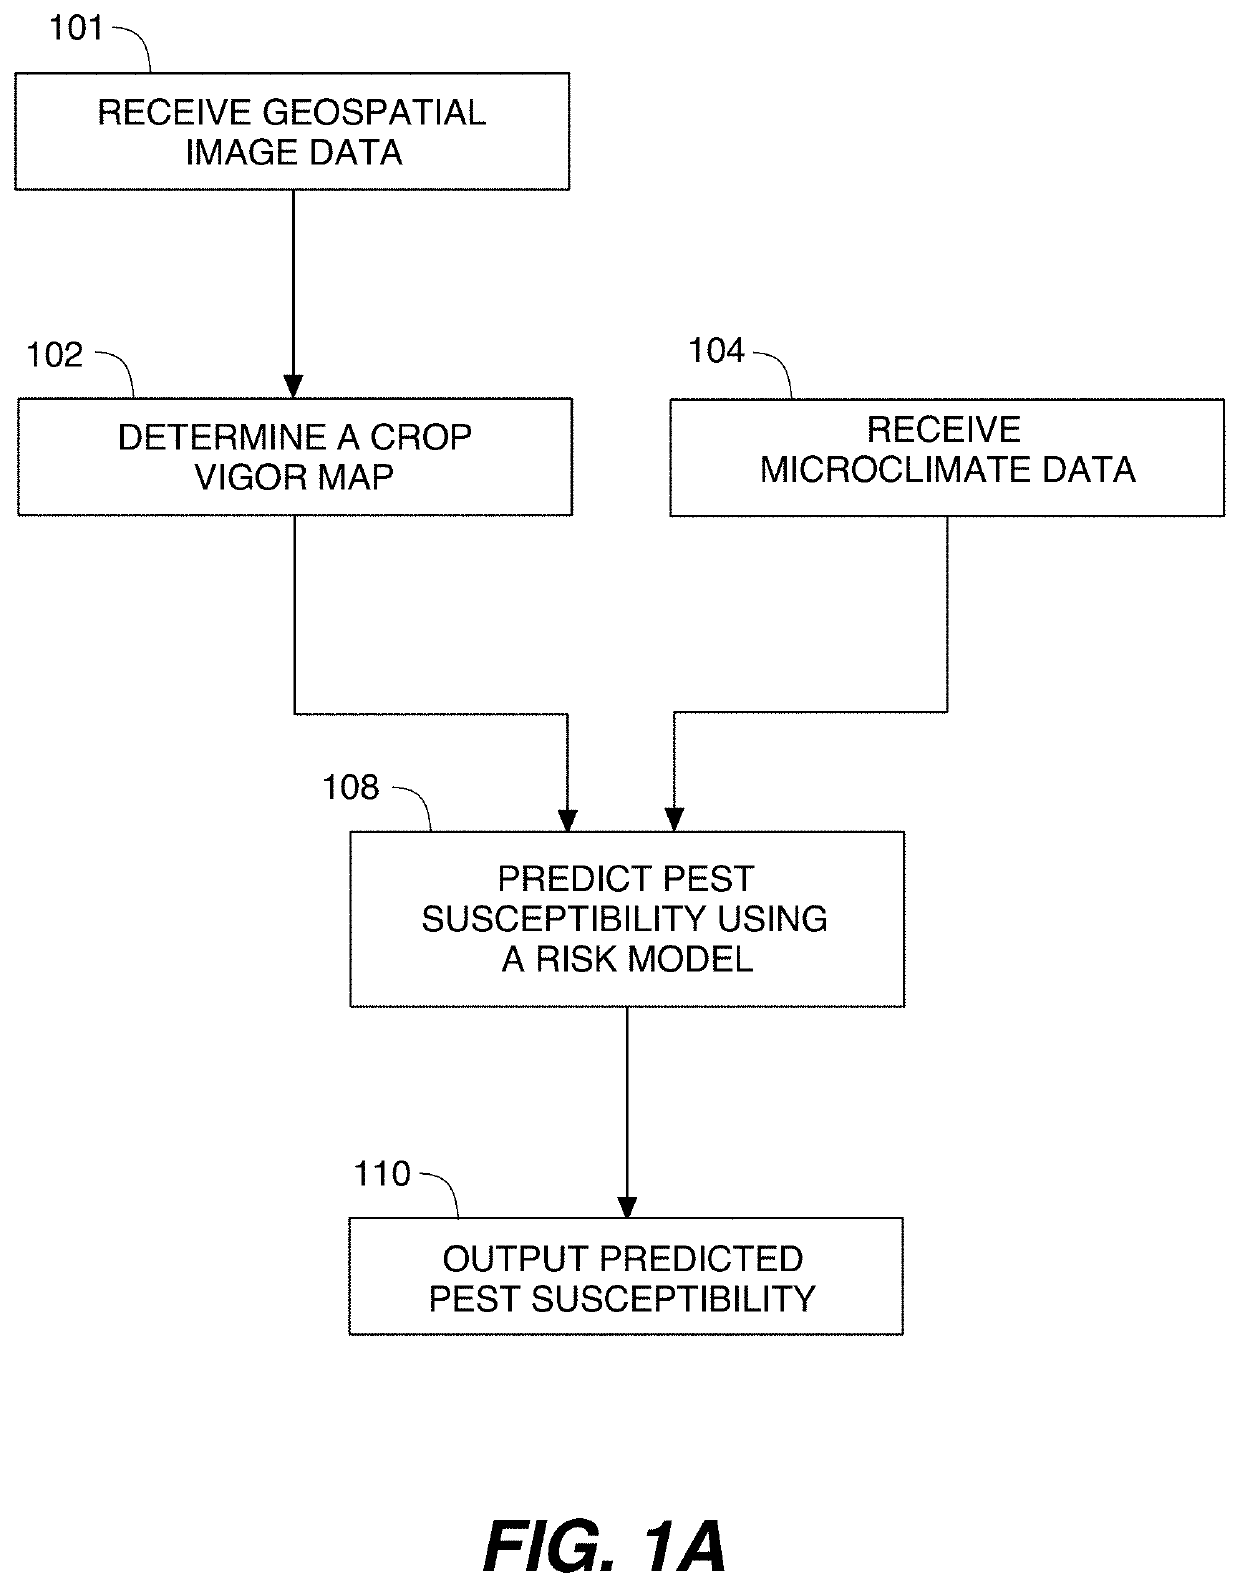 Methods and systems for crop pest management utilizing geospatial images and microclimate data